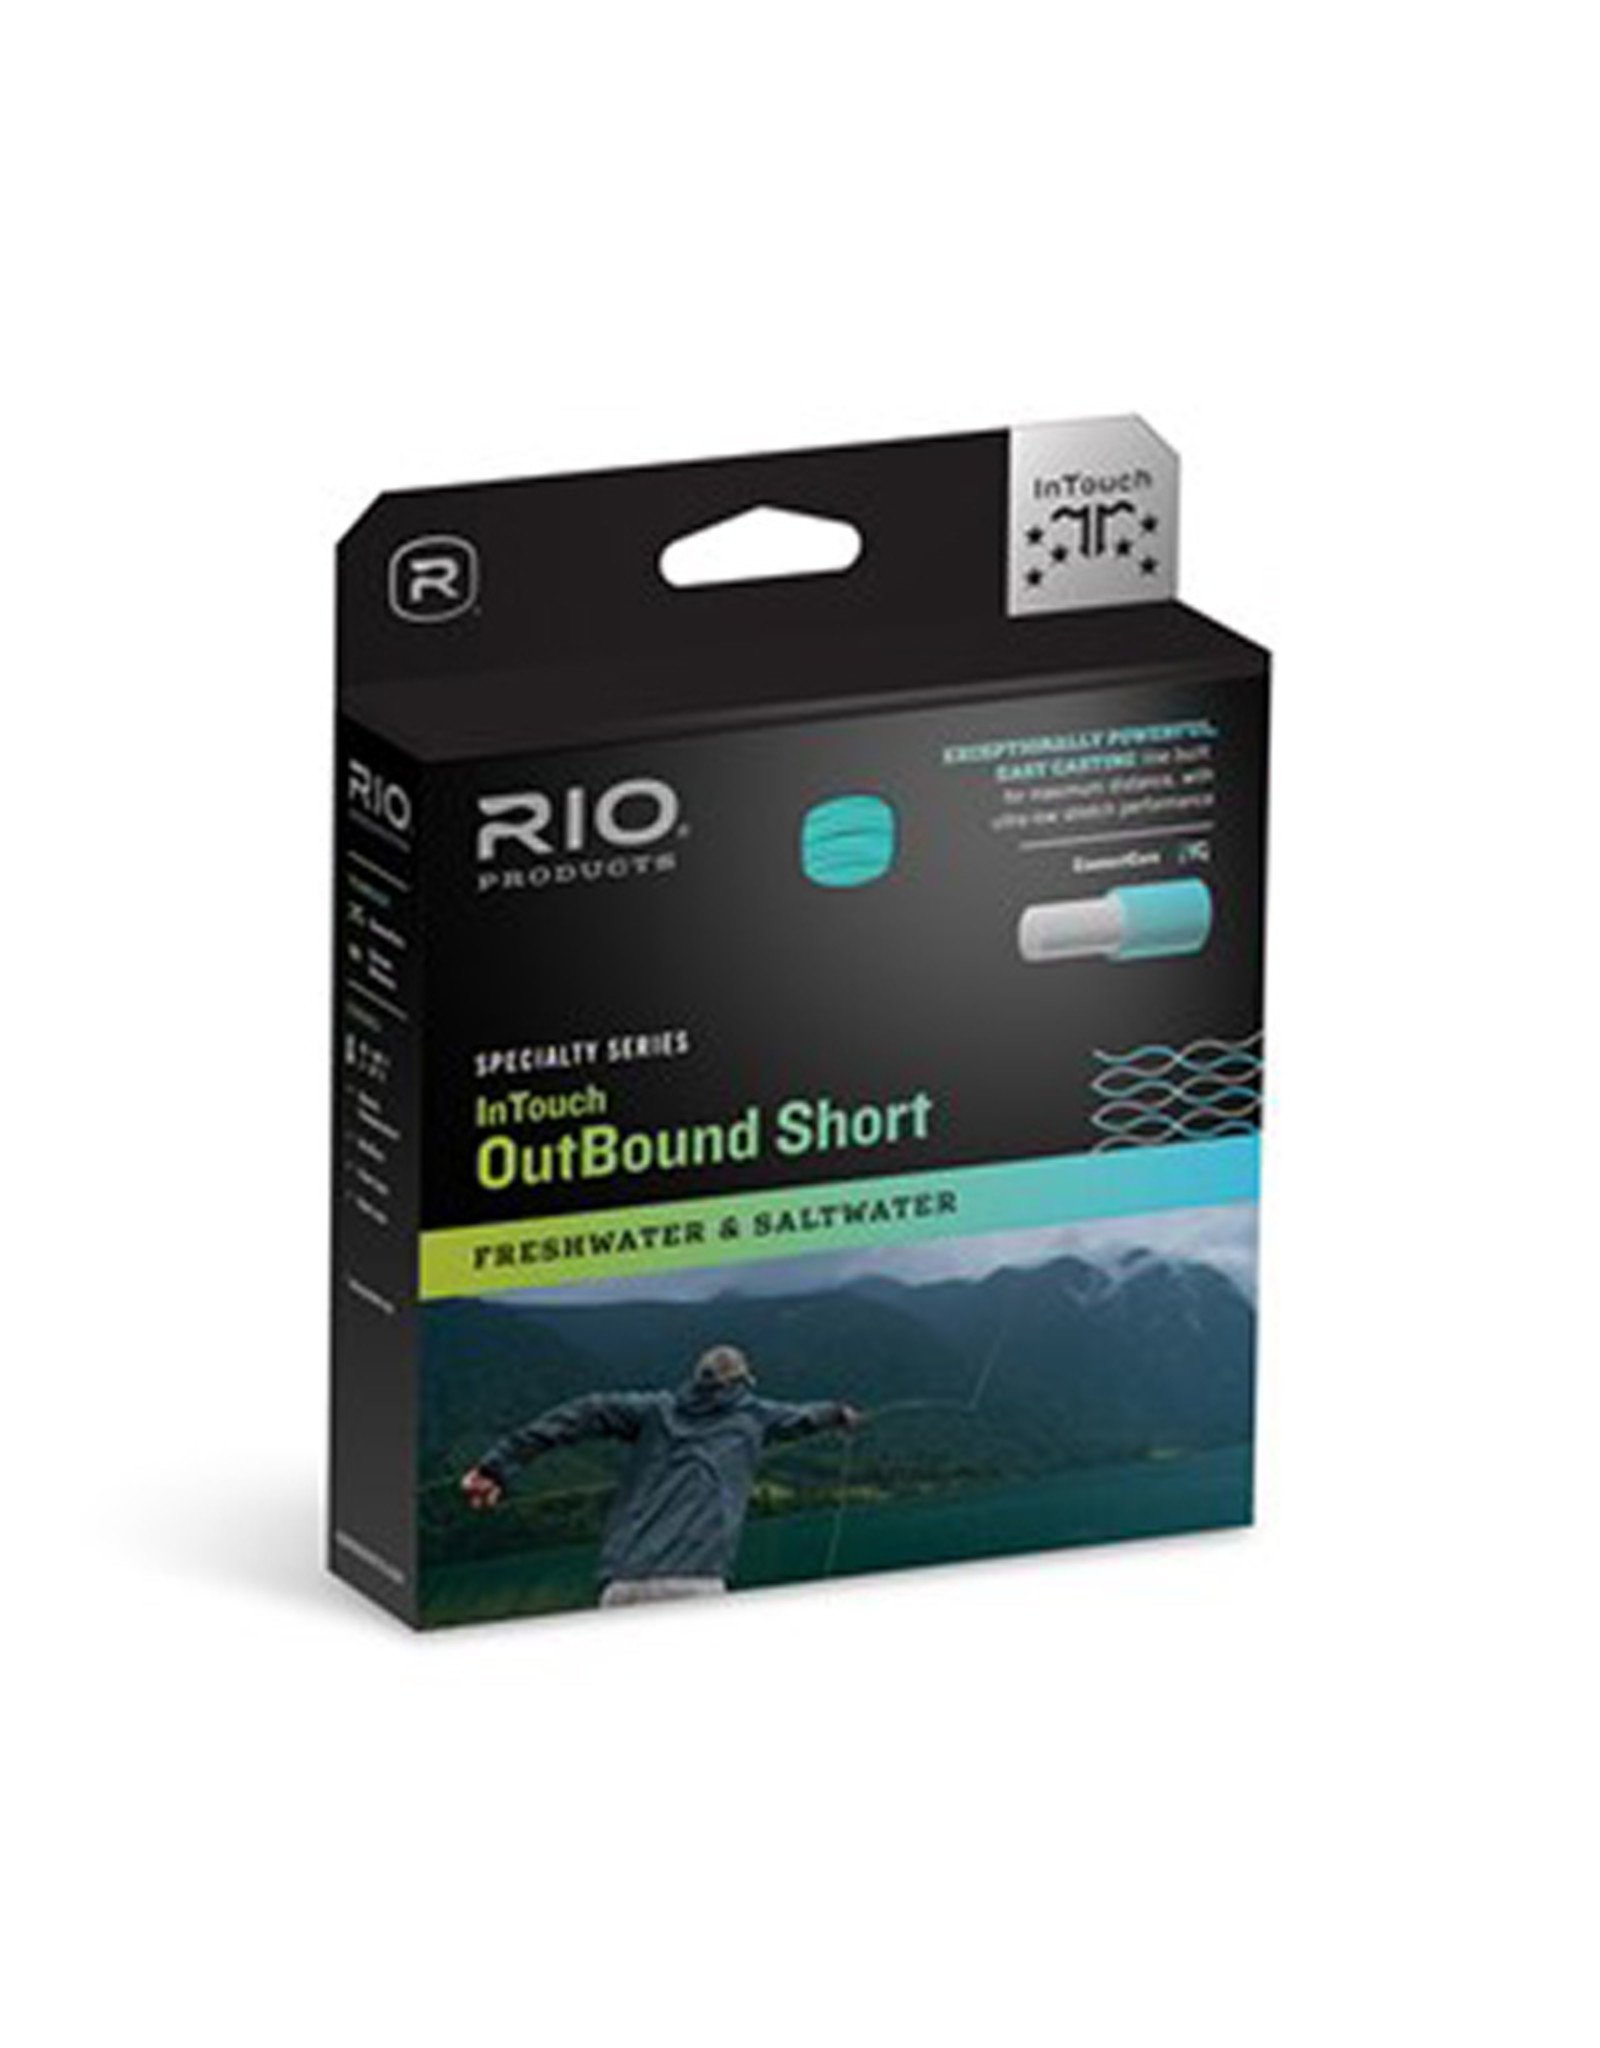 RIO Products InTouch OutBound Short F/I